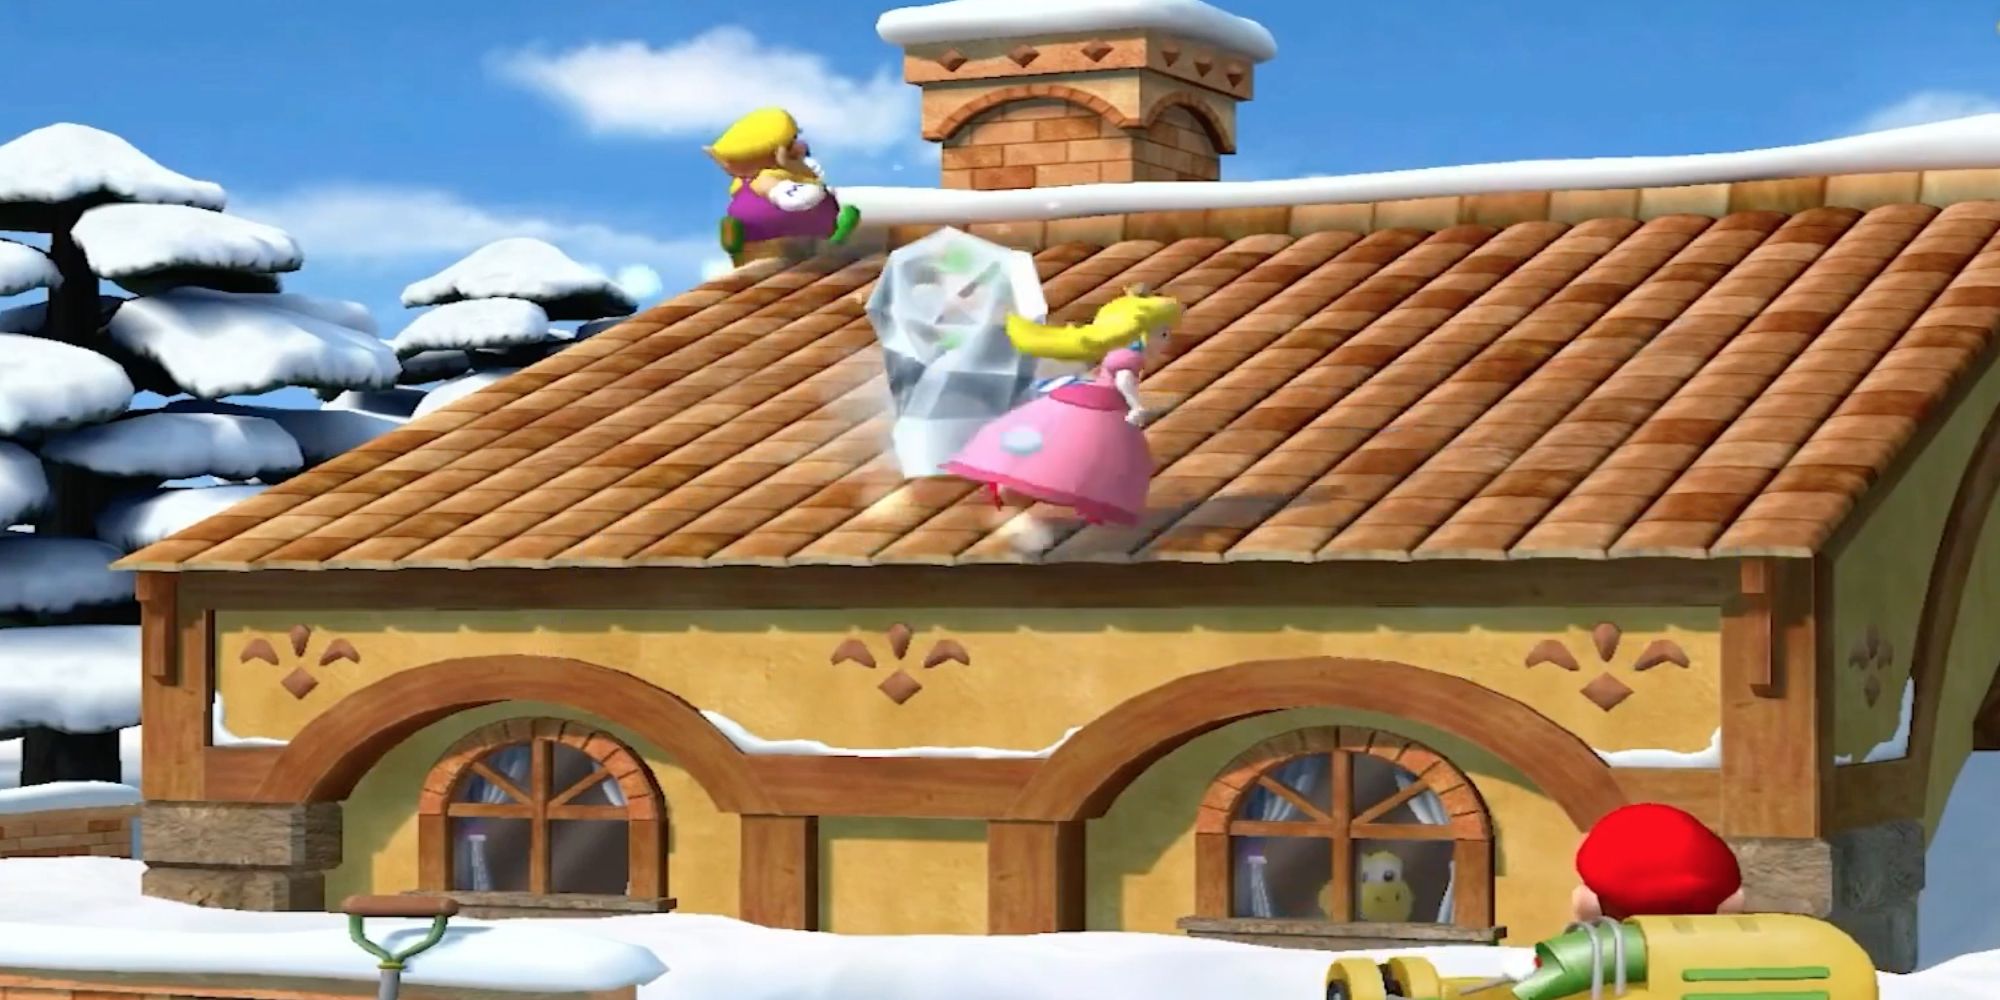 Snow Way Out from Mario Party 8 Featuring Wario, Princess Peach, and Mario